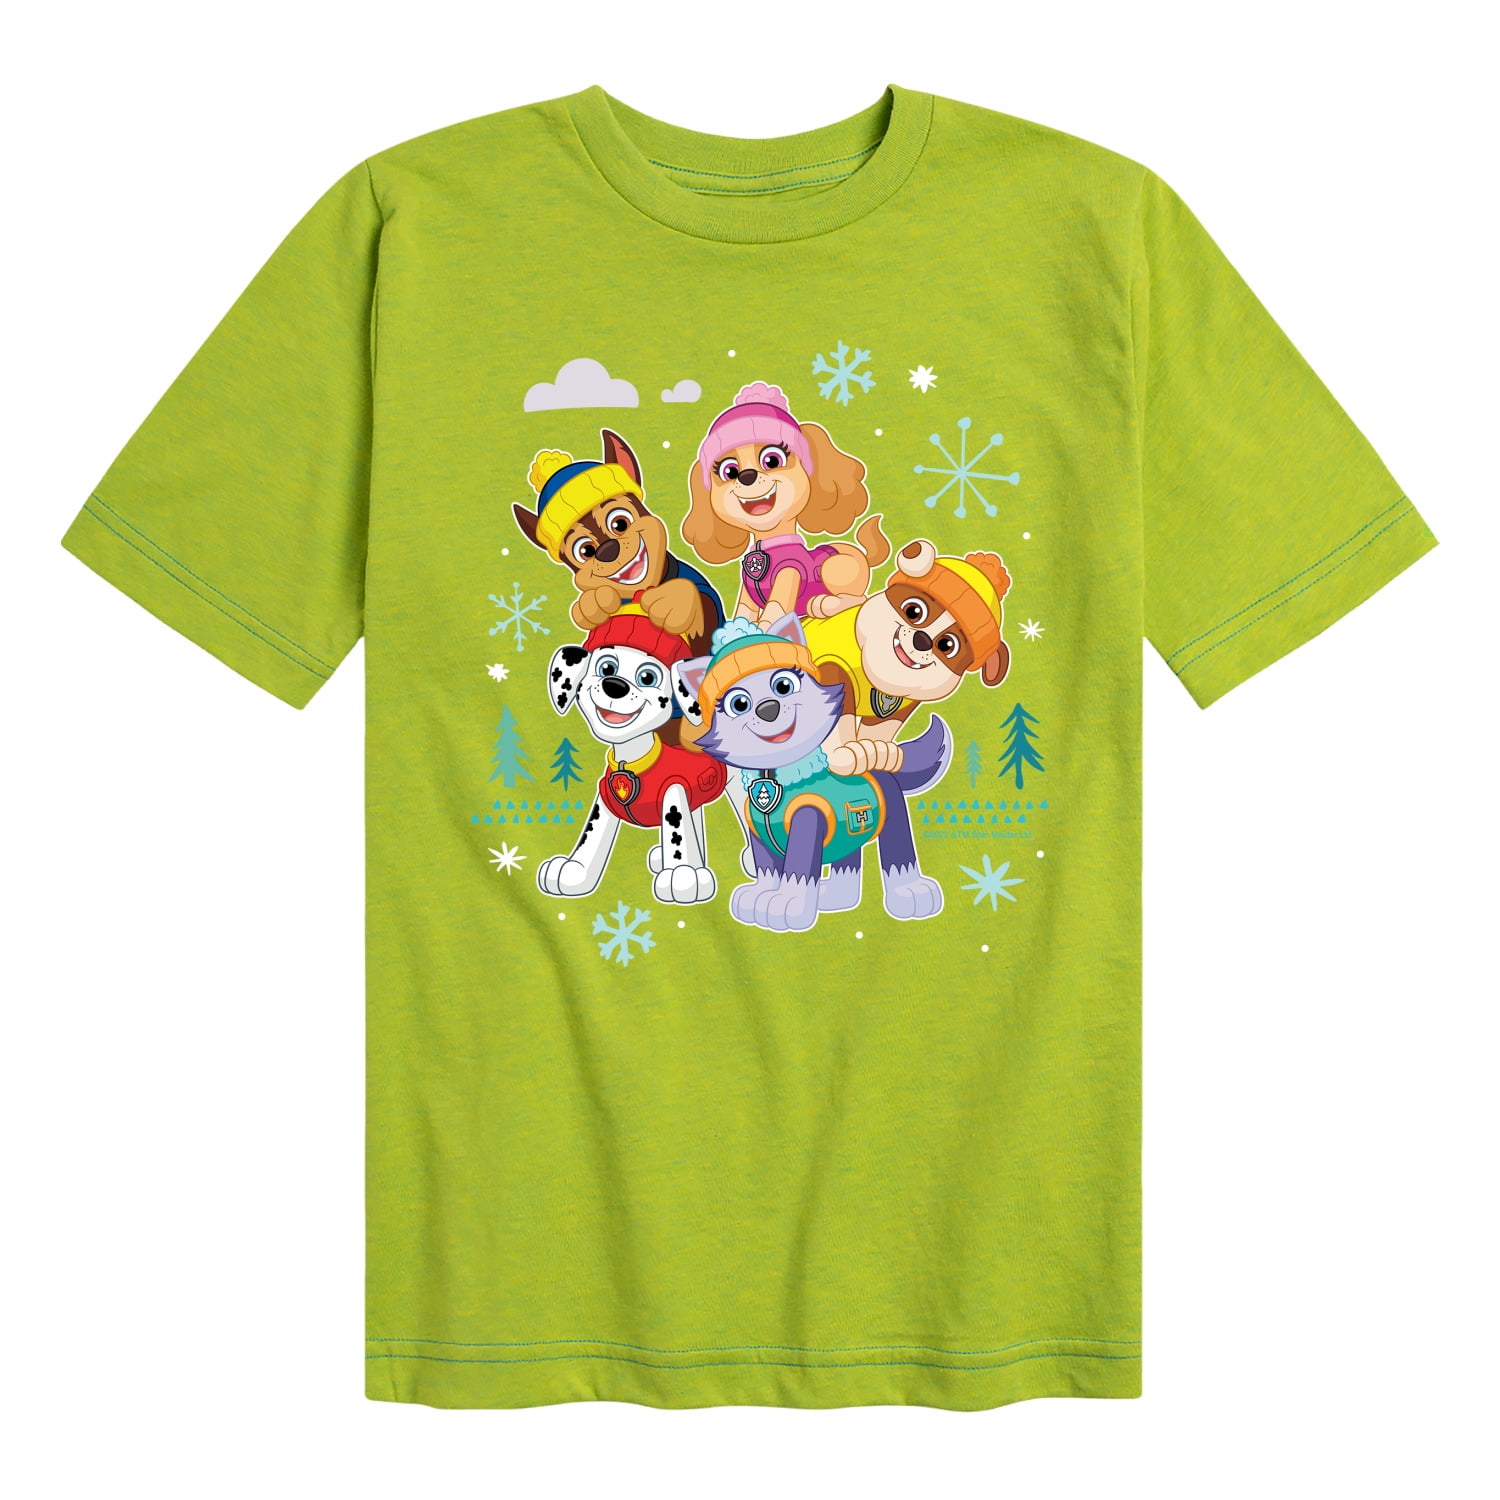 Paw Patrol - Paw Patrol Group With Icons - Toddler And Youth Short Sleeve  Graphic T-Shirt